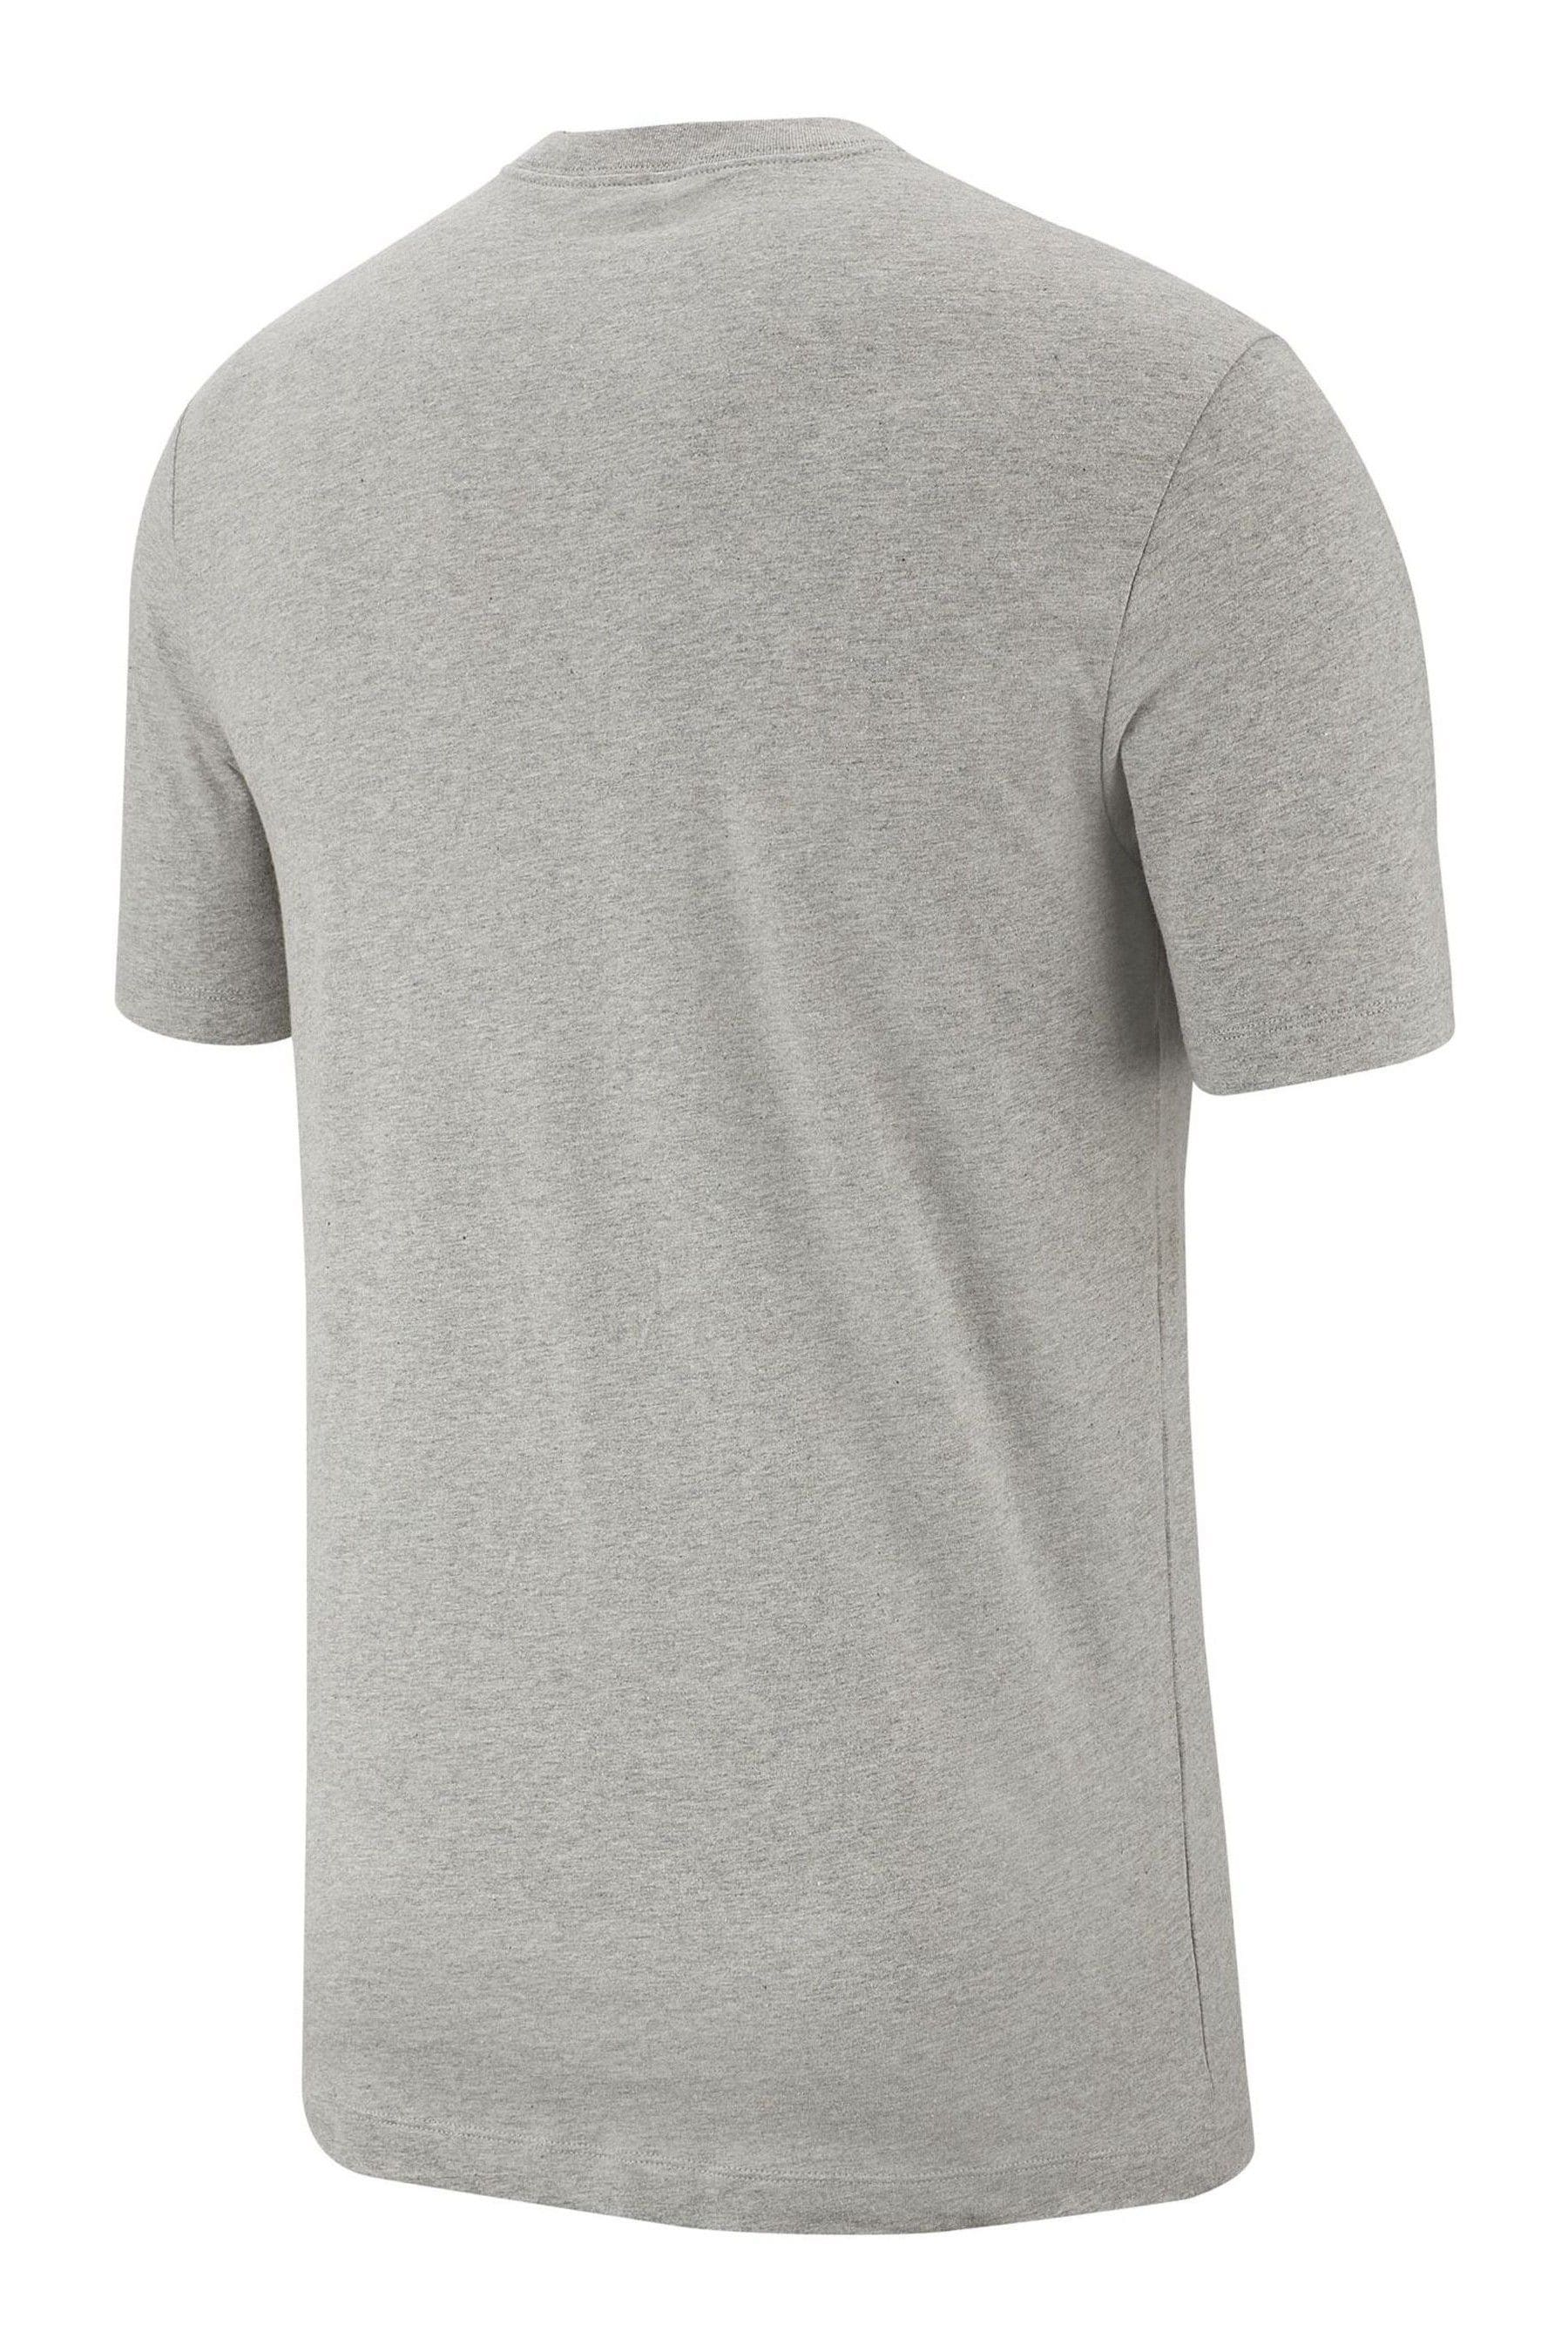 Buy Nike Club T-Shirt from the Next UK online shop